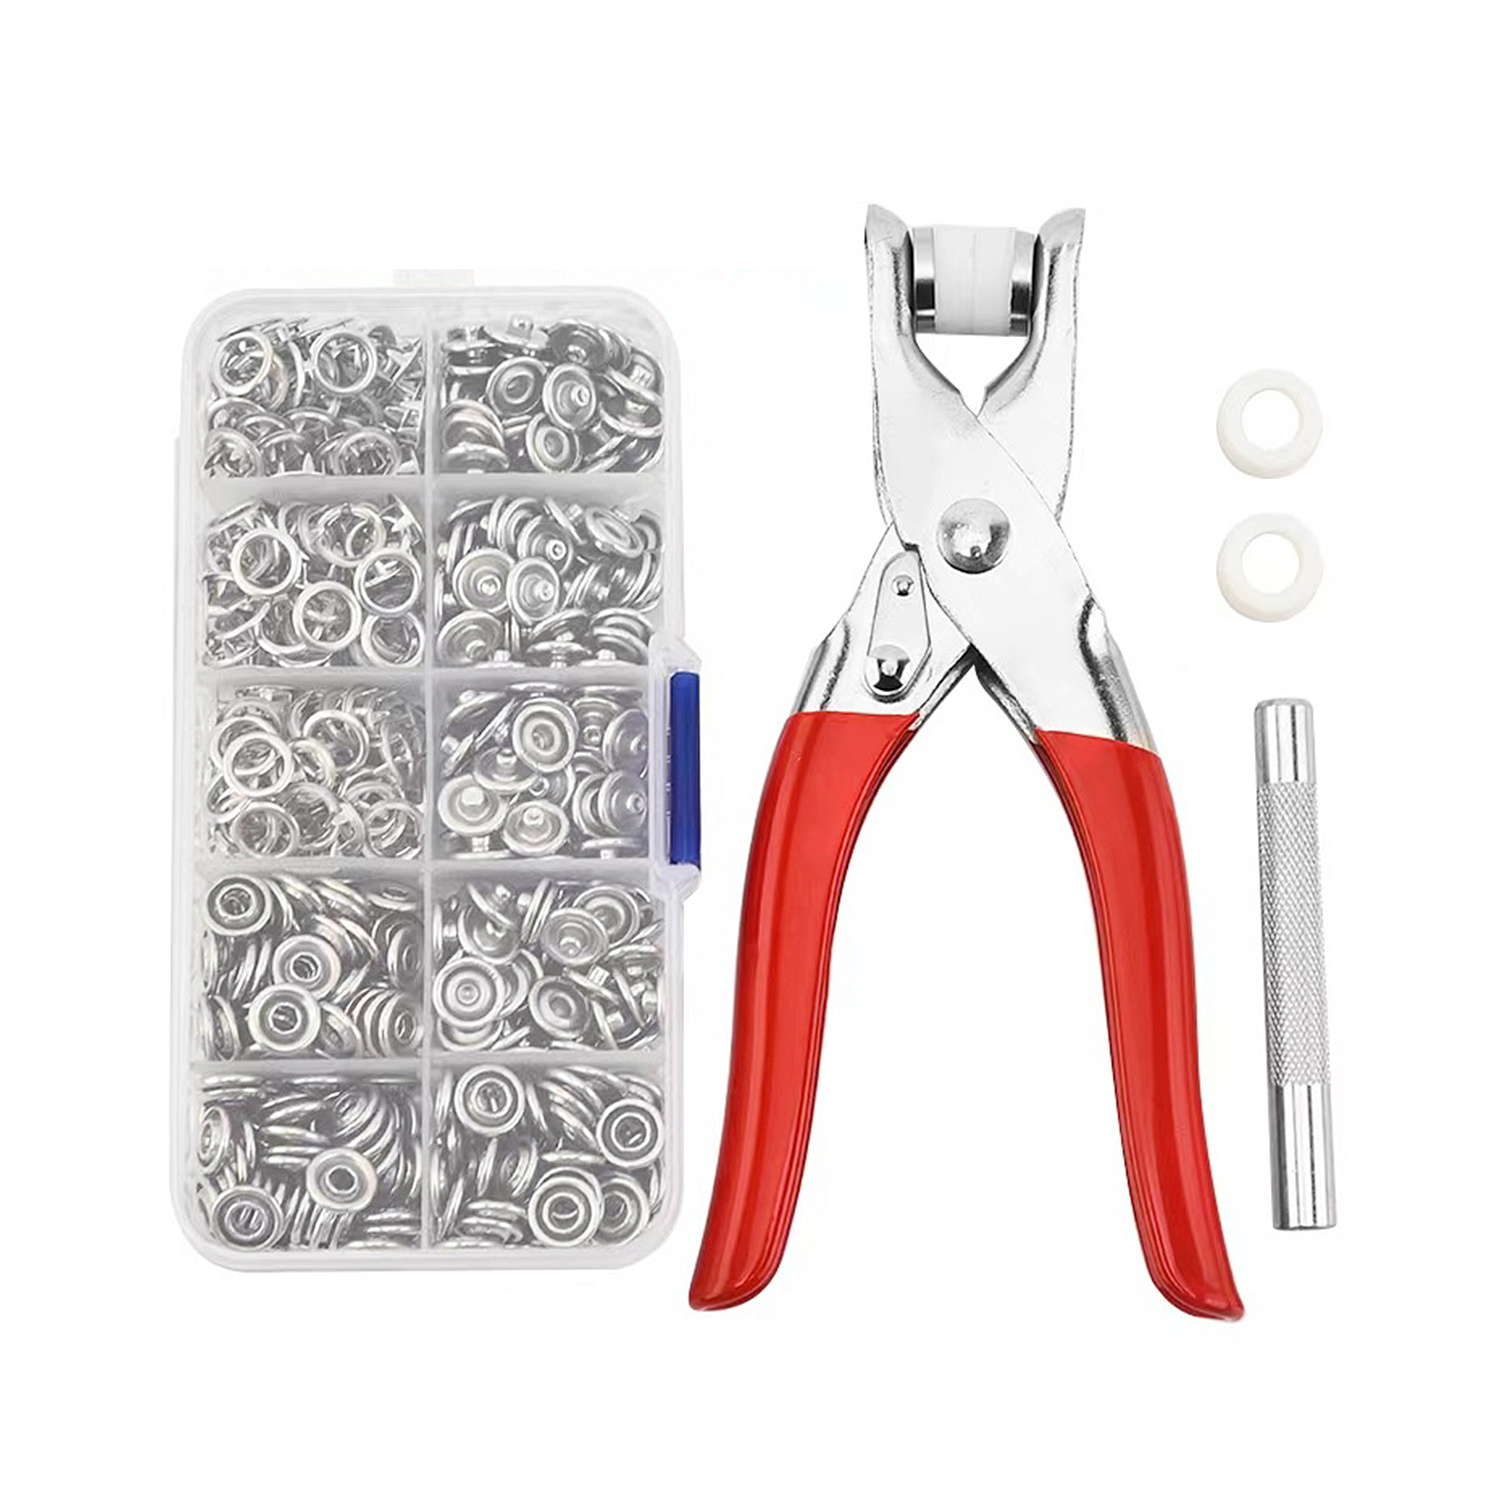 T5 Kam Snap Kit With Easy Set Pliers 380 Snaps With Tools and